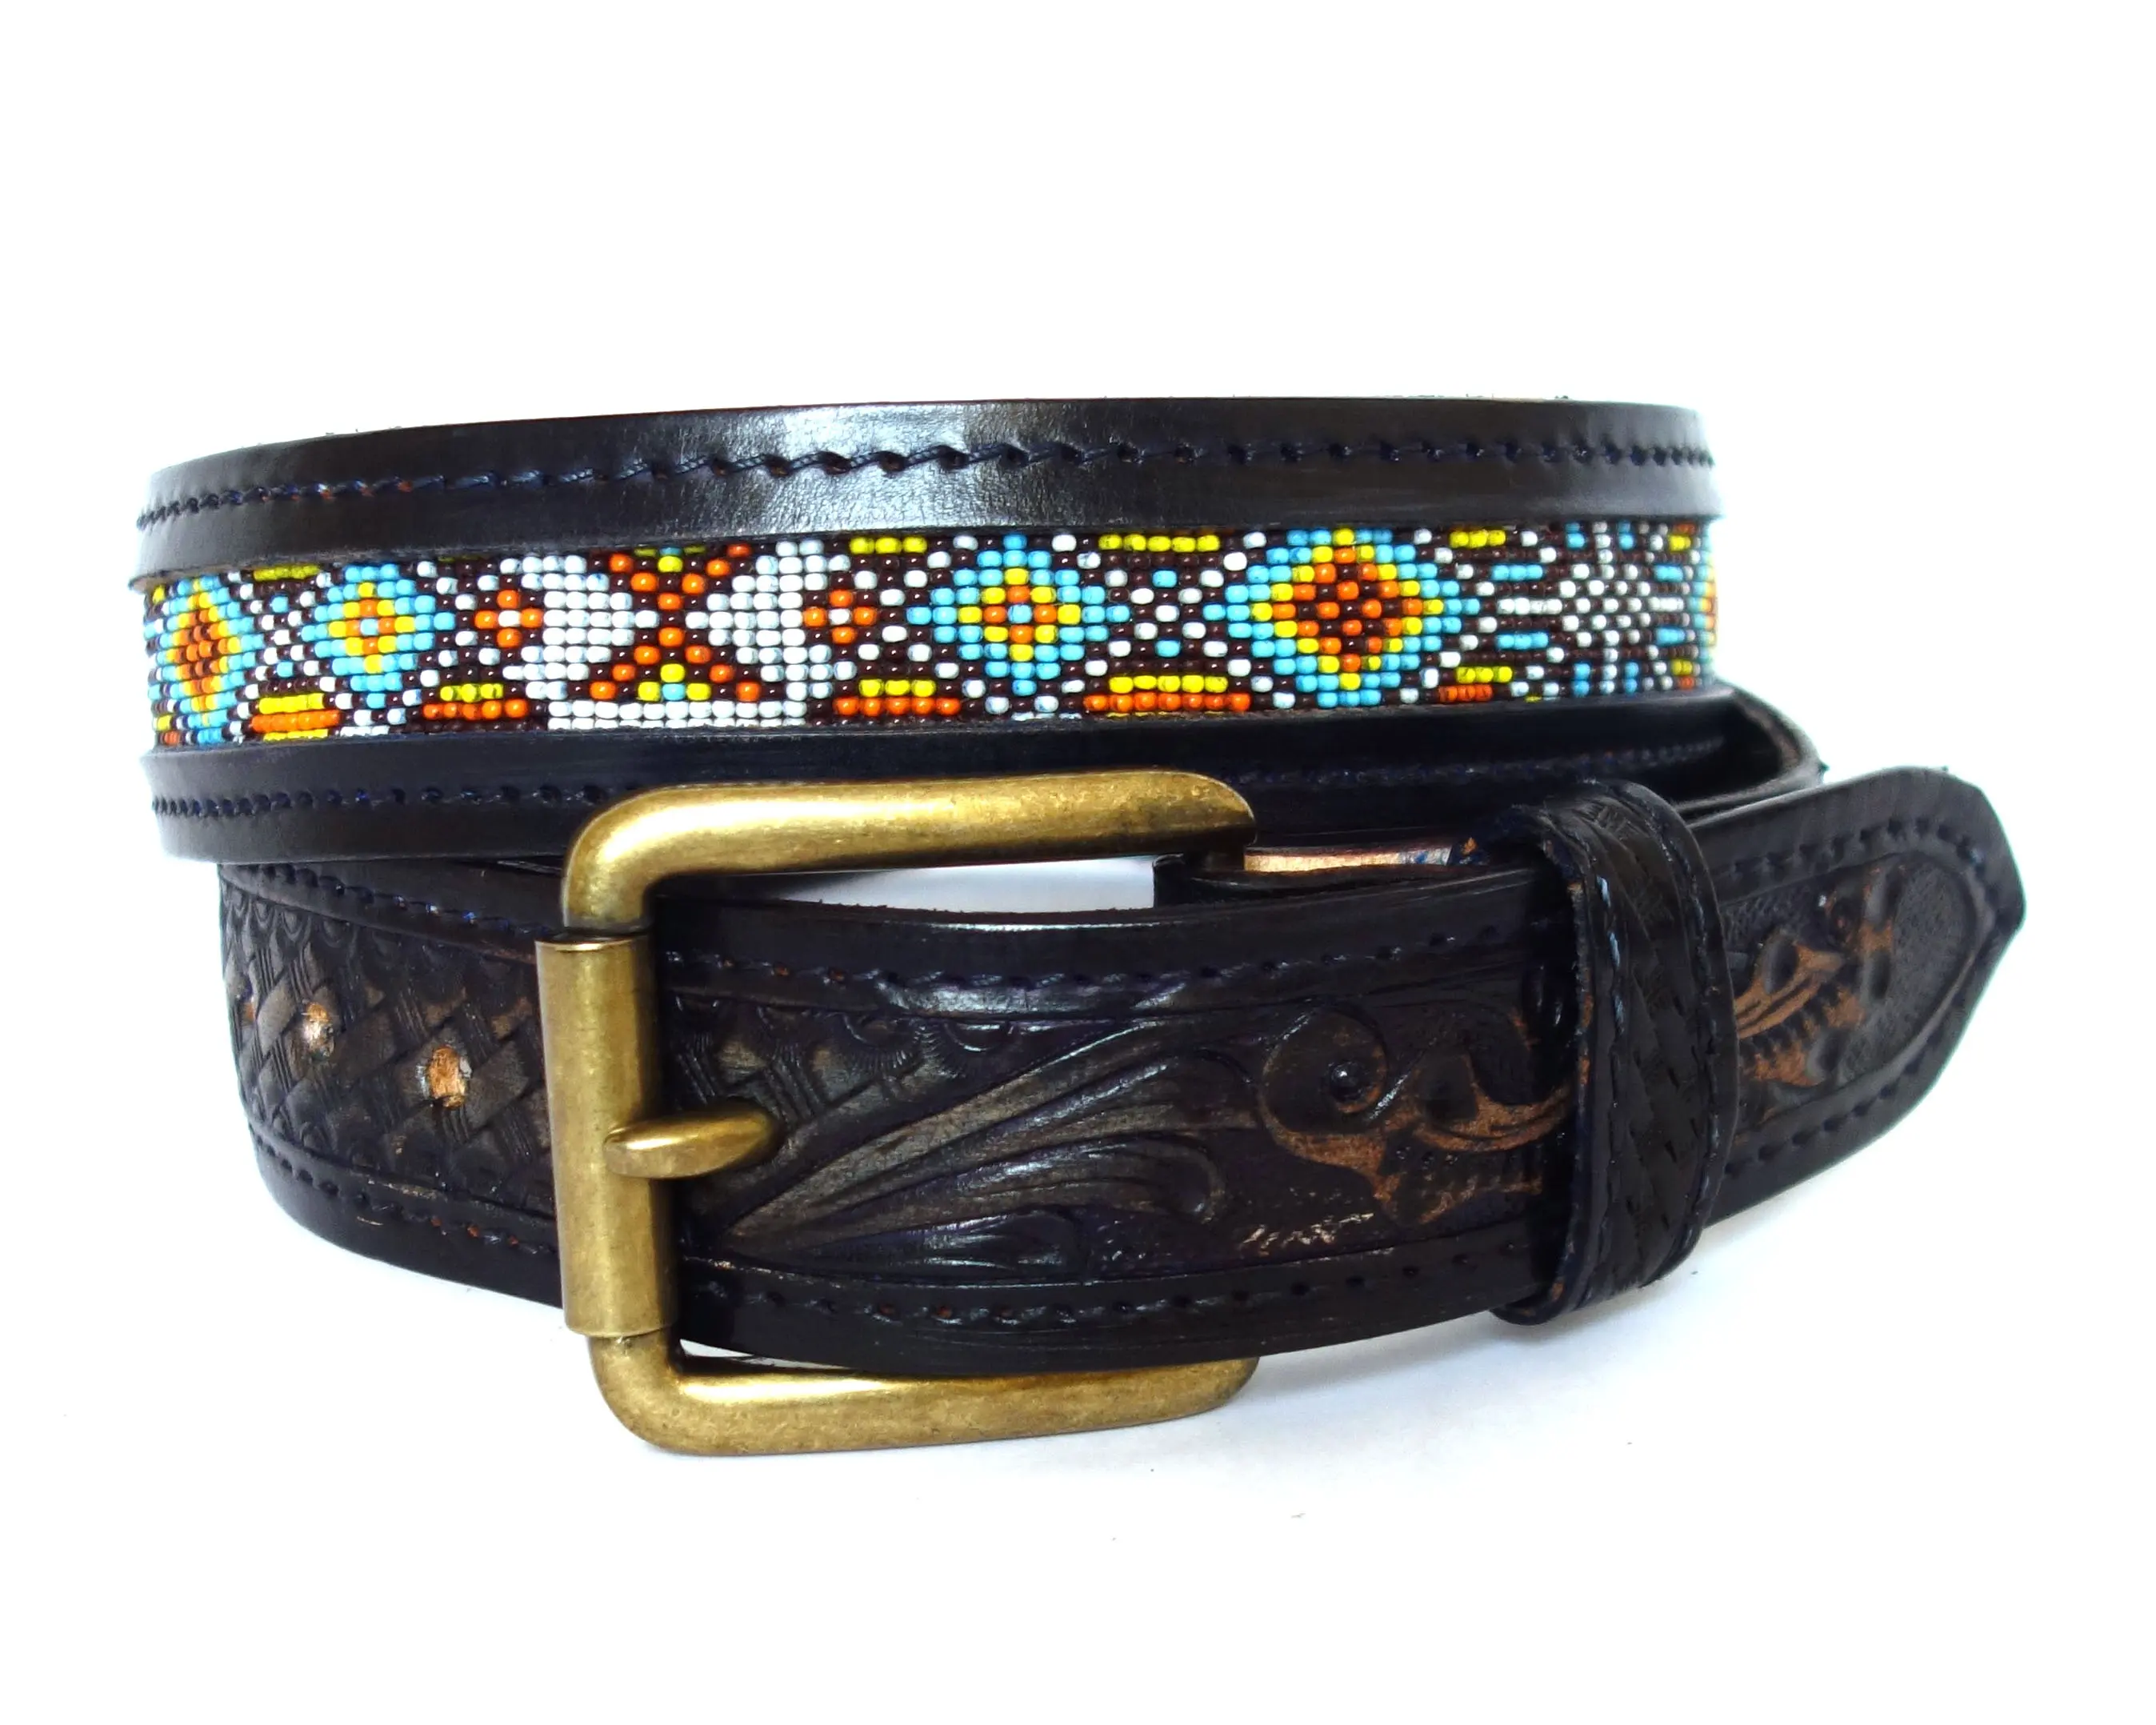 Seed Bead Leather Belts Beaded Leather Belts in Whole sale at Factory Rate Handmade Western Belt